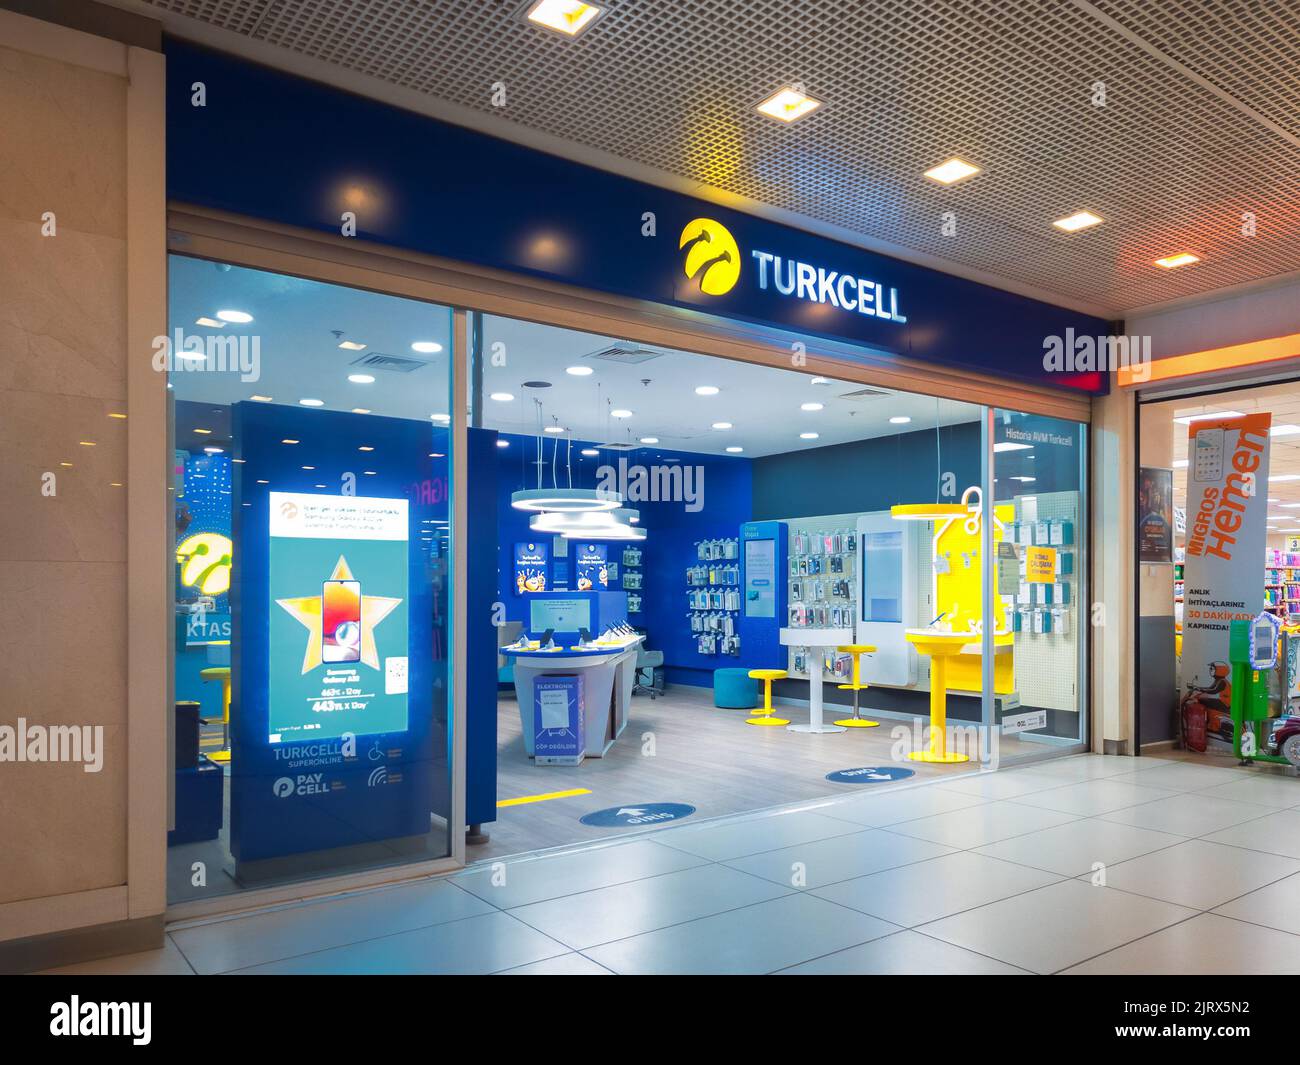 Istanbul, Turkey - Mar 20,2022: Landscape Close-up View of Turkcell Store, Turkcell is a Turkish Cell Phone Carrier and Internet Service Provider, It Stock Photo